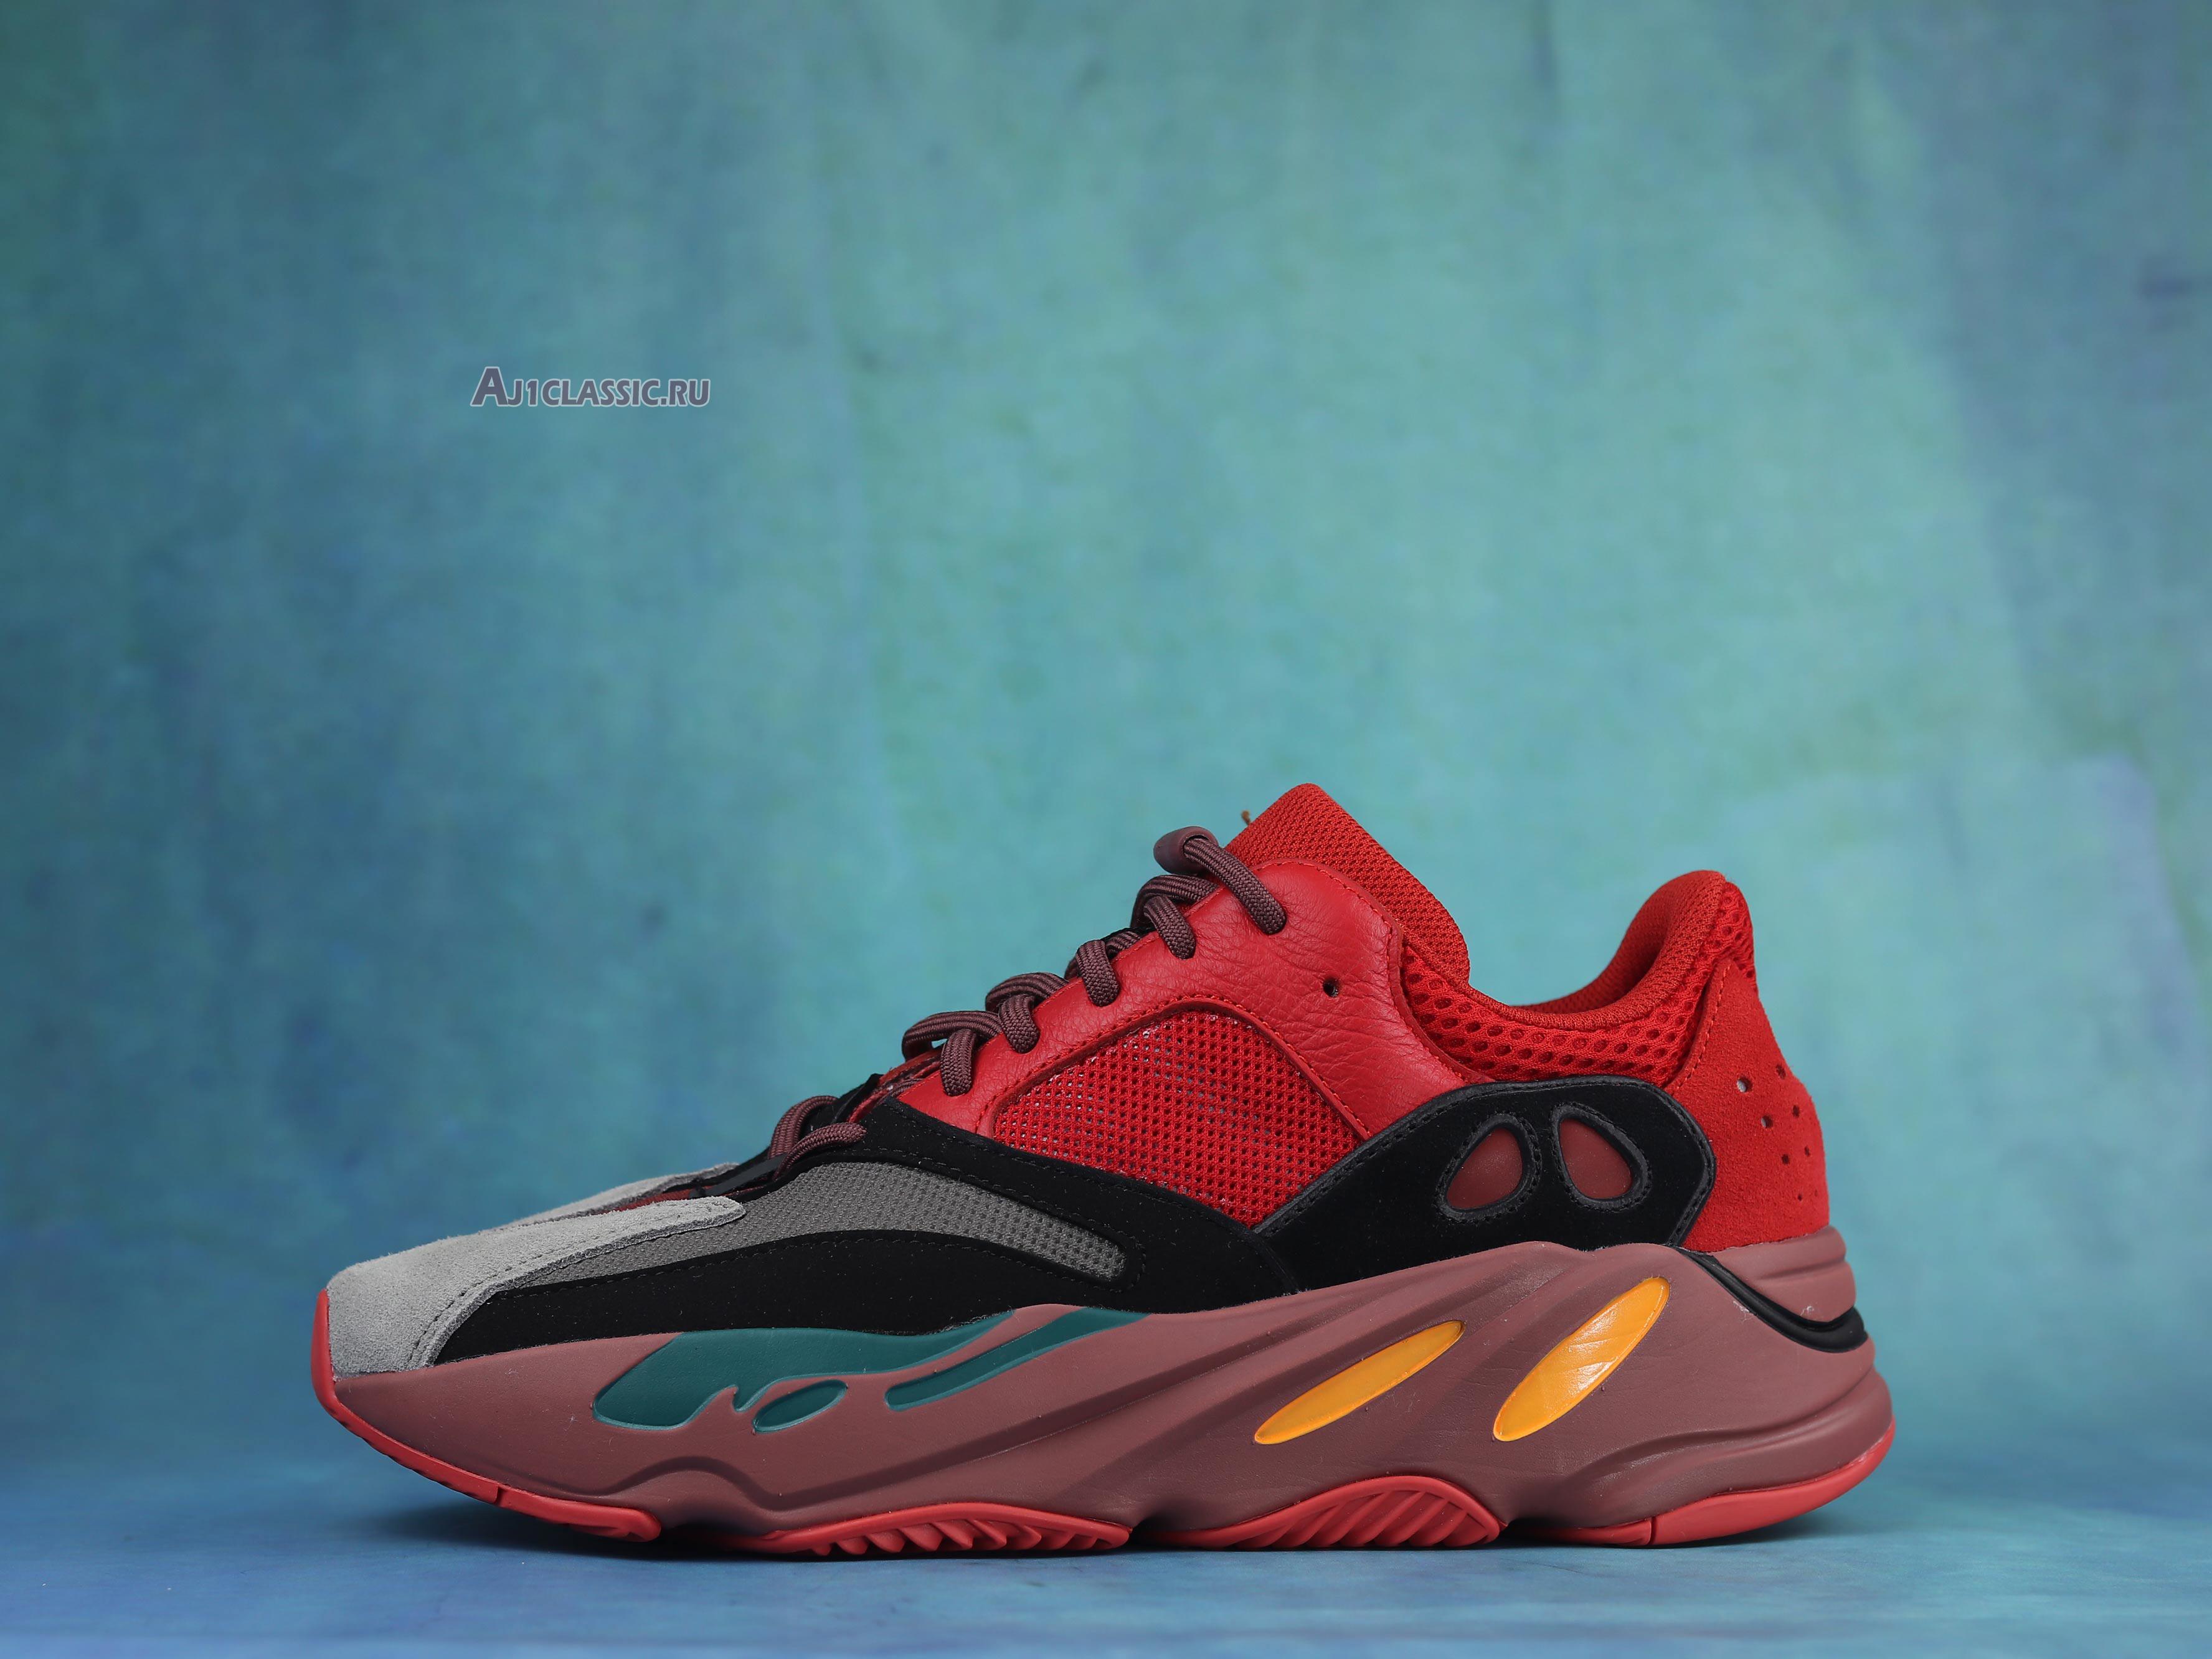 Adidas Yeezy Boost 700 "Hi-Res Red" HQ6979